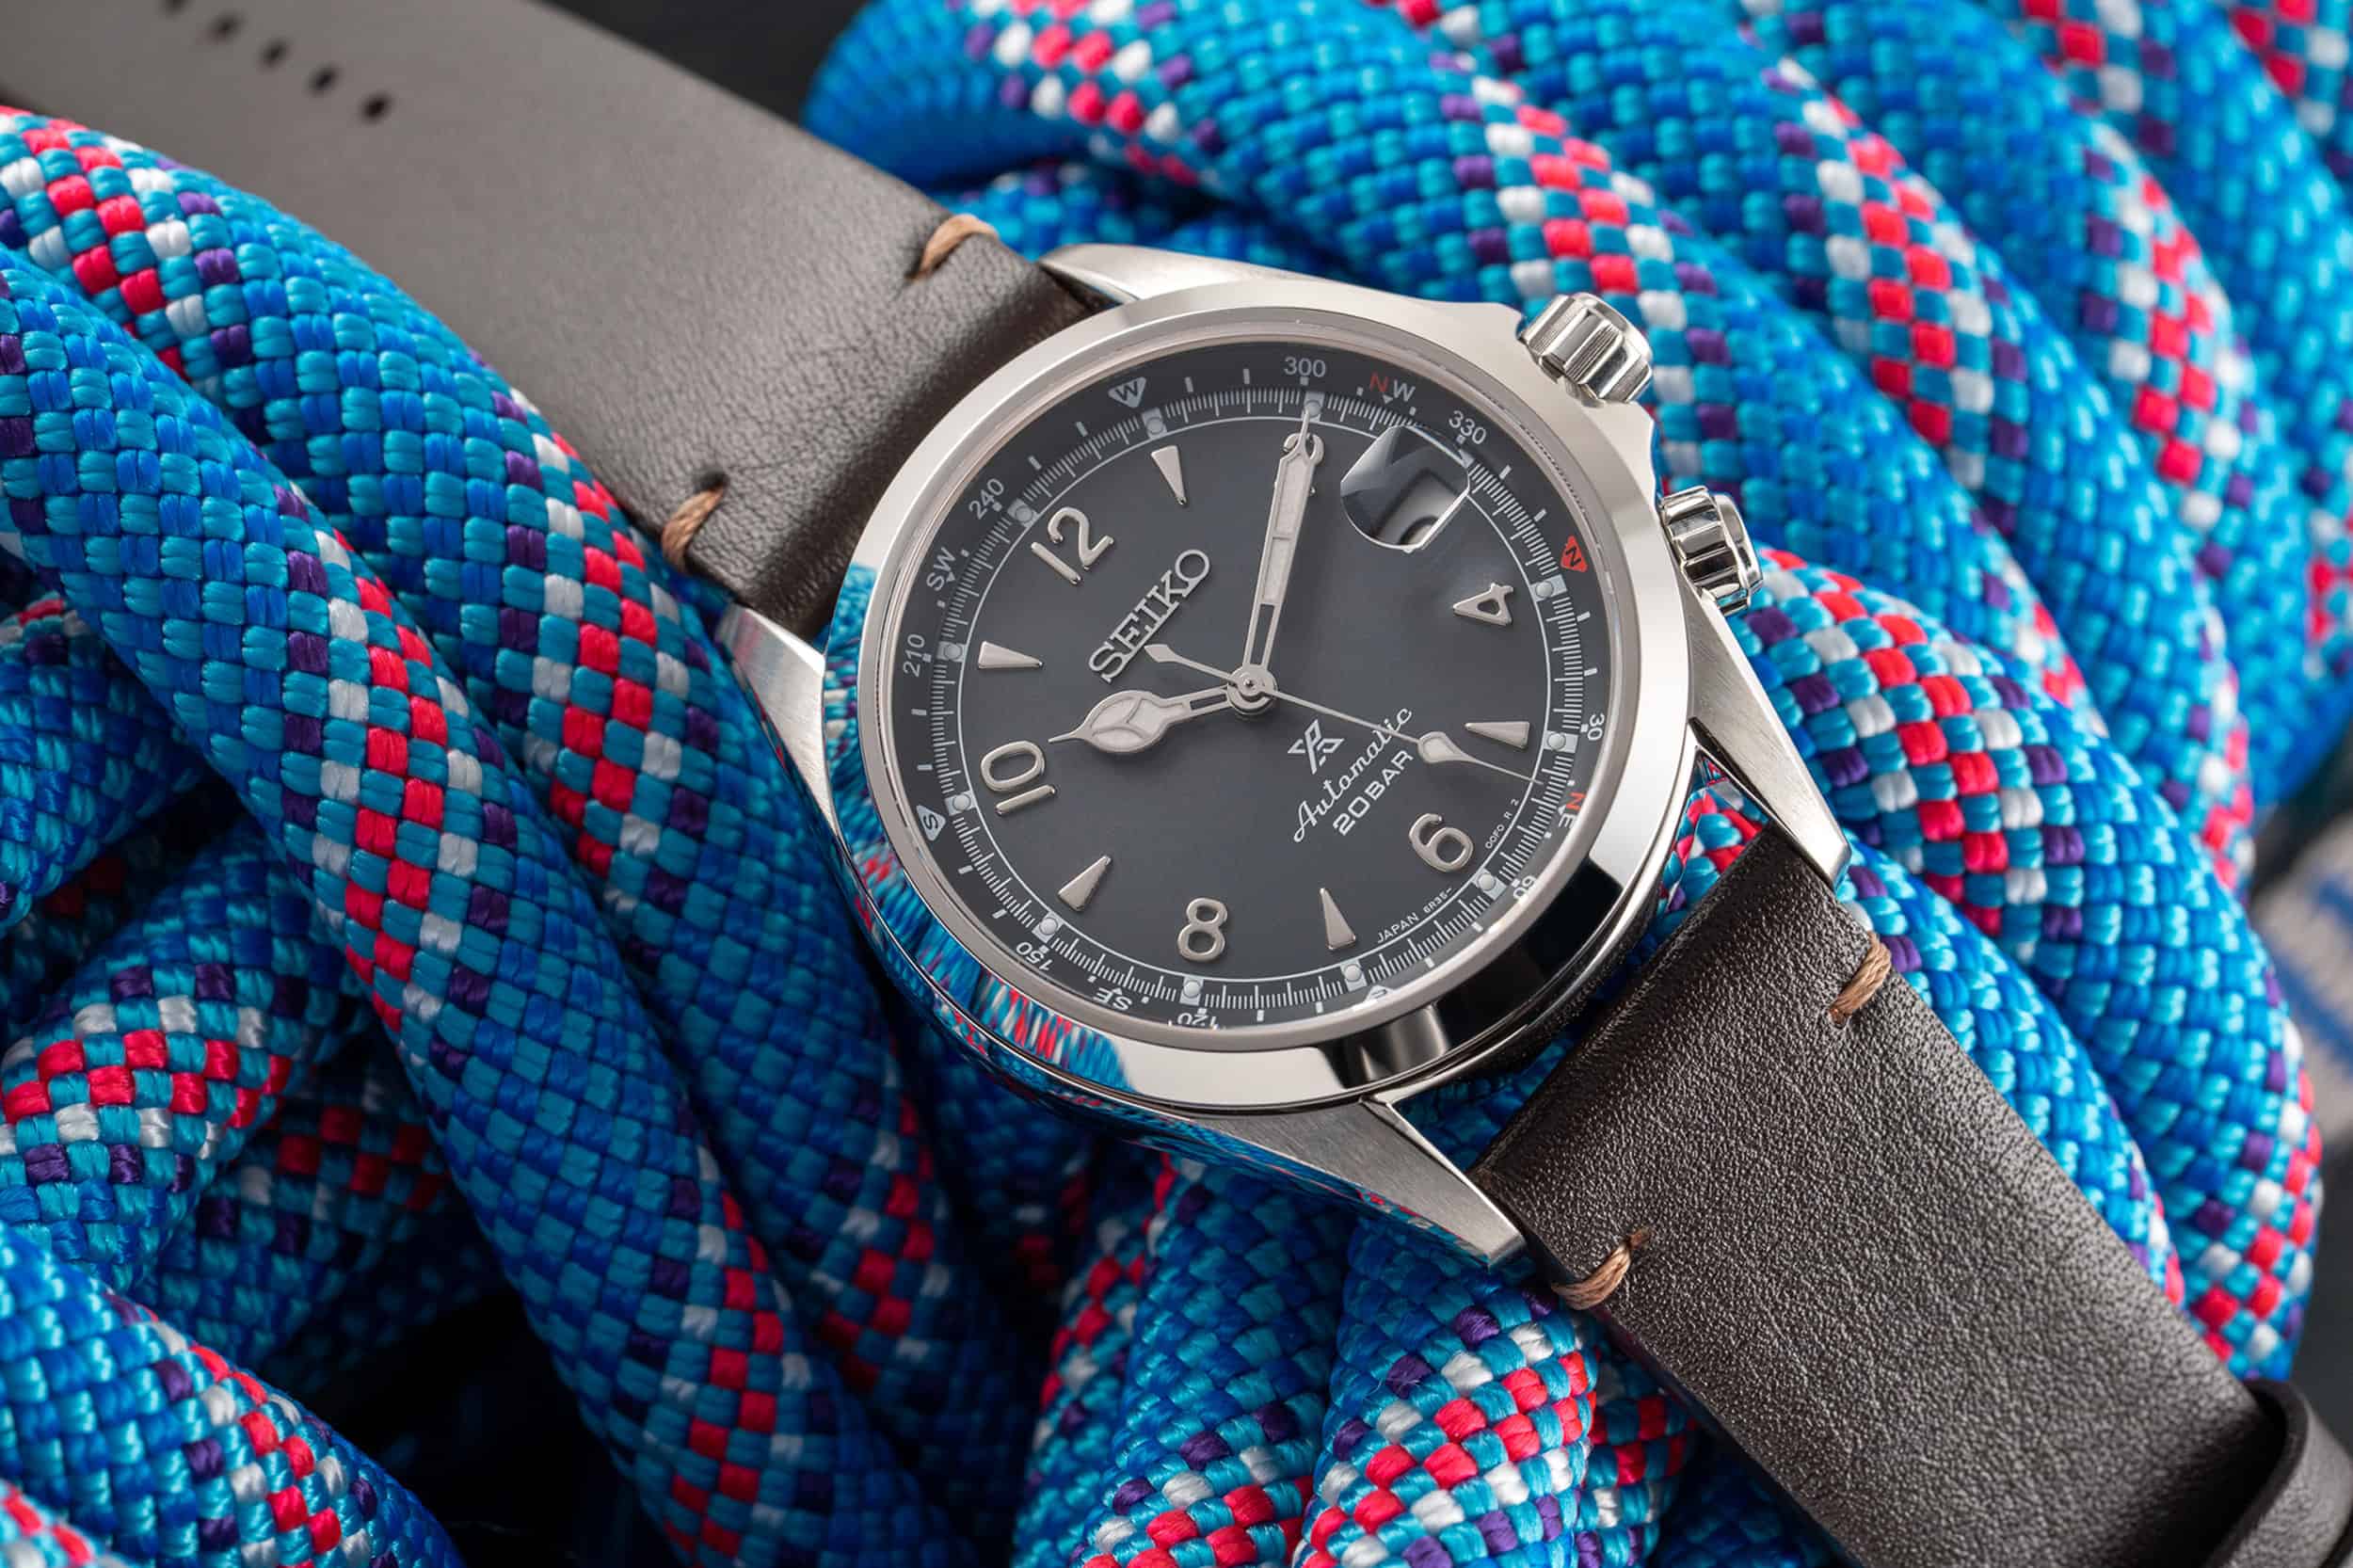 Introducing the Seiko Alpinist a European Exclusive with a Gray Dial - Worn Wound